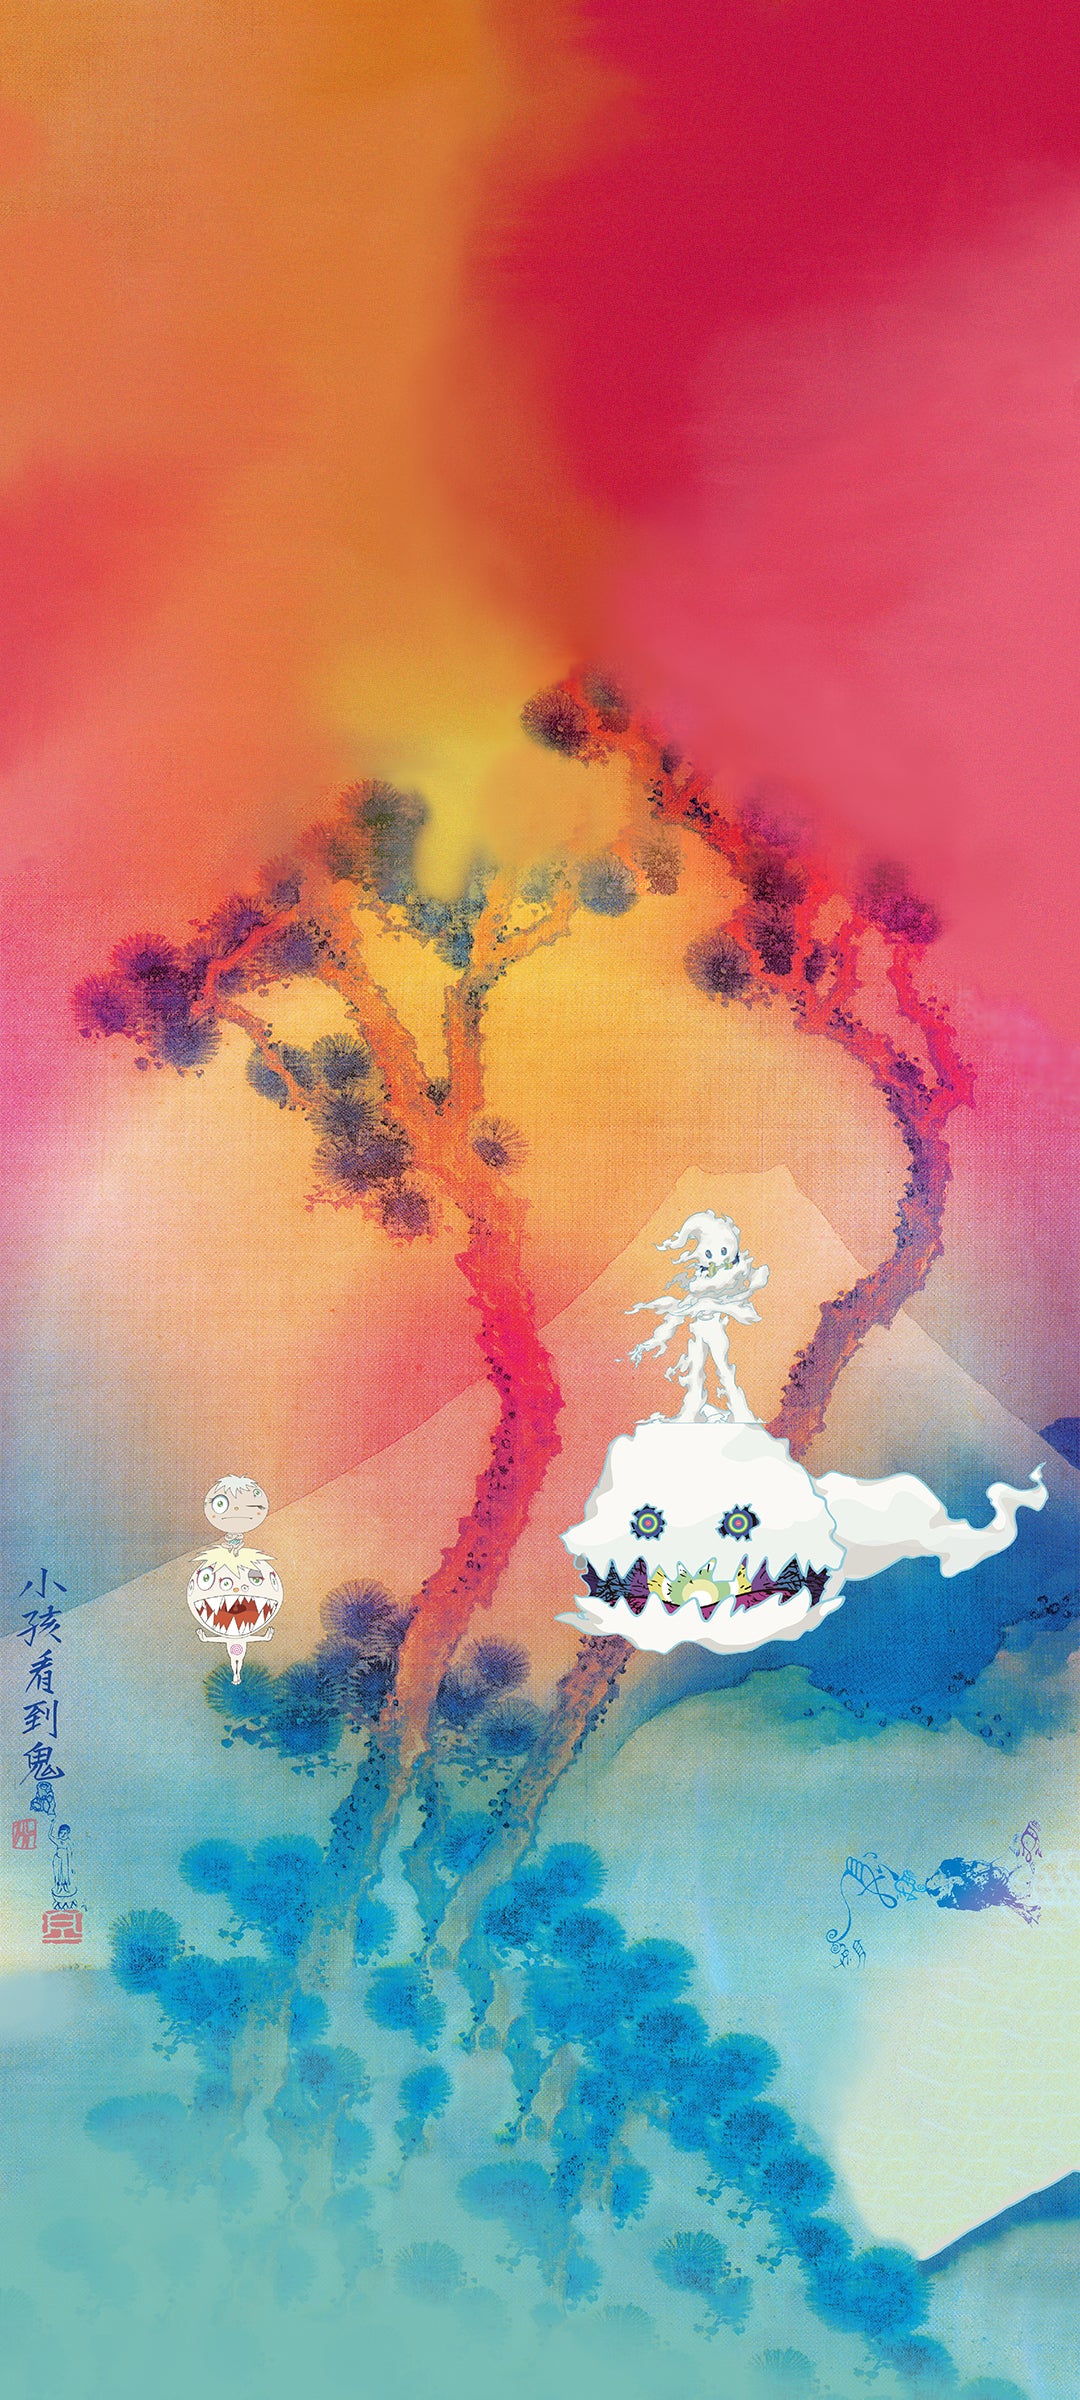 KIDS SEE GHOSTS Album Cover 2400x1080 Wallpaper